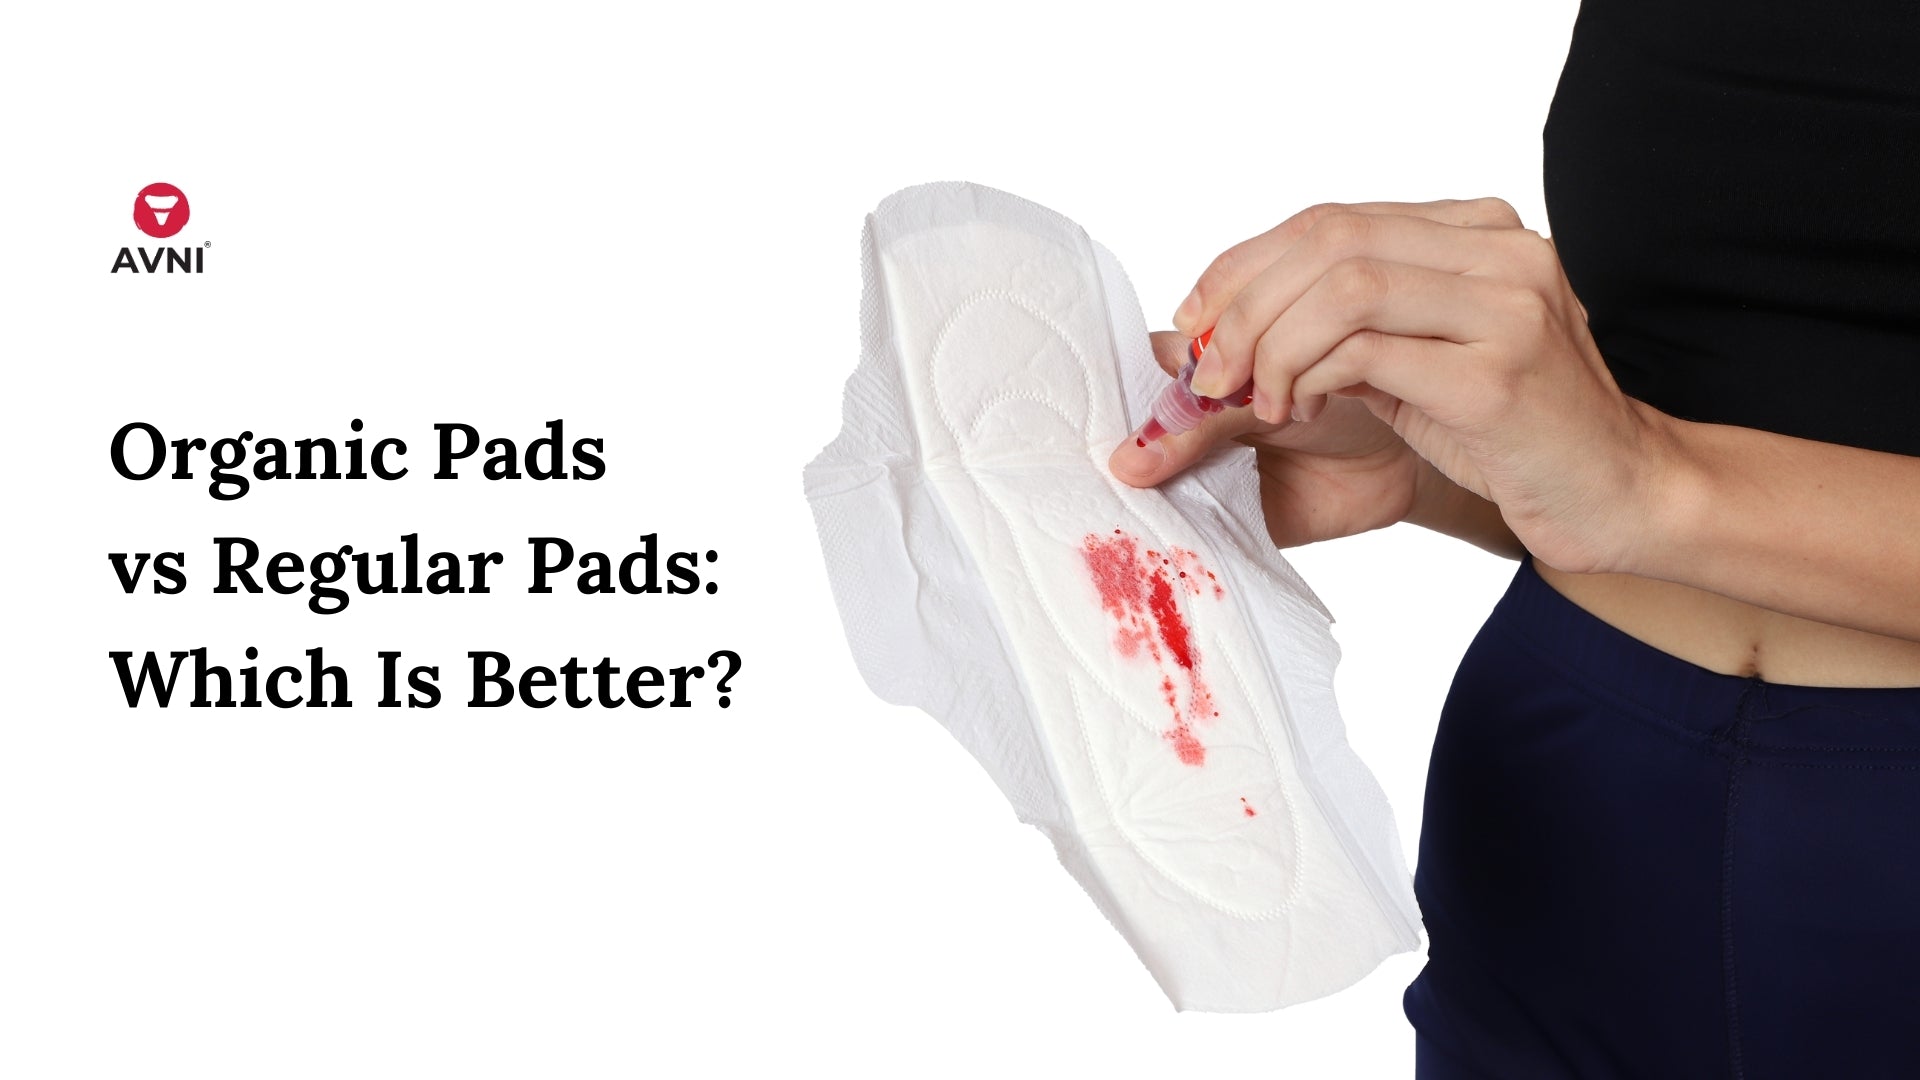 Can using organic tampons and pads make your period shorter?